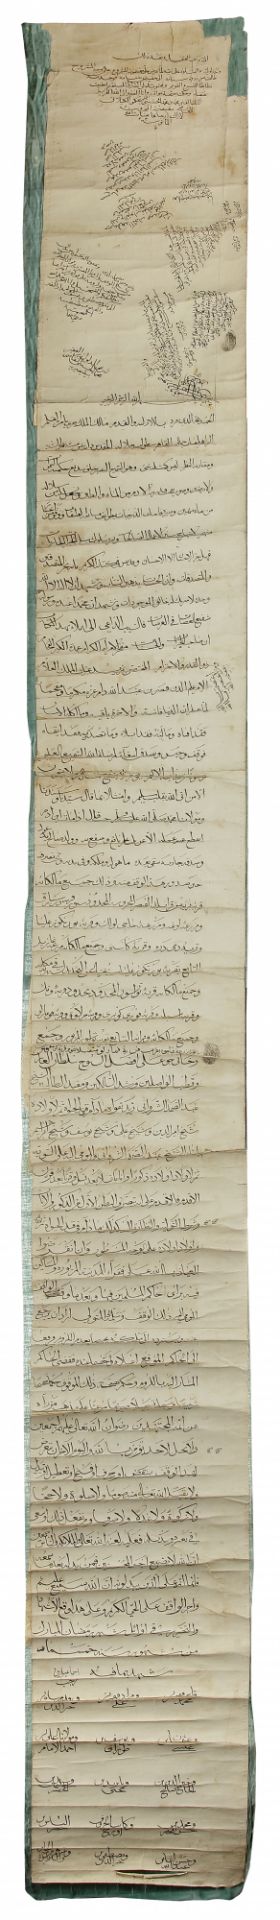 A SELJUK OFFICIAL WAQF DOCUMENT IN SCROLL FORM, ANATOLIA, DATED RAMADAN 500/APRIL1107, WITH A LATER